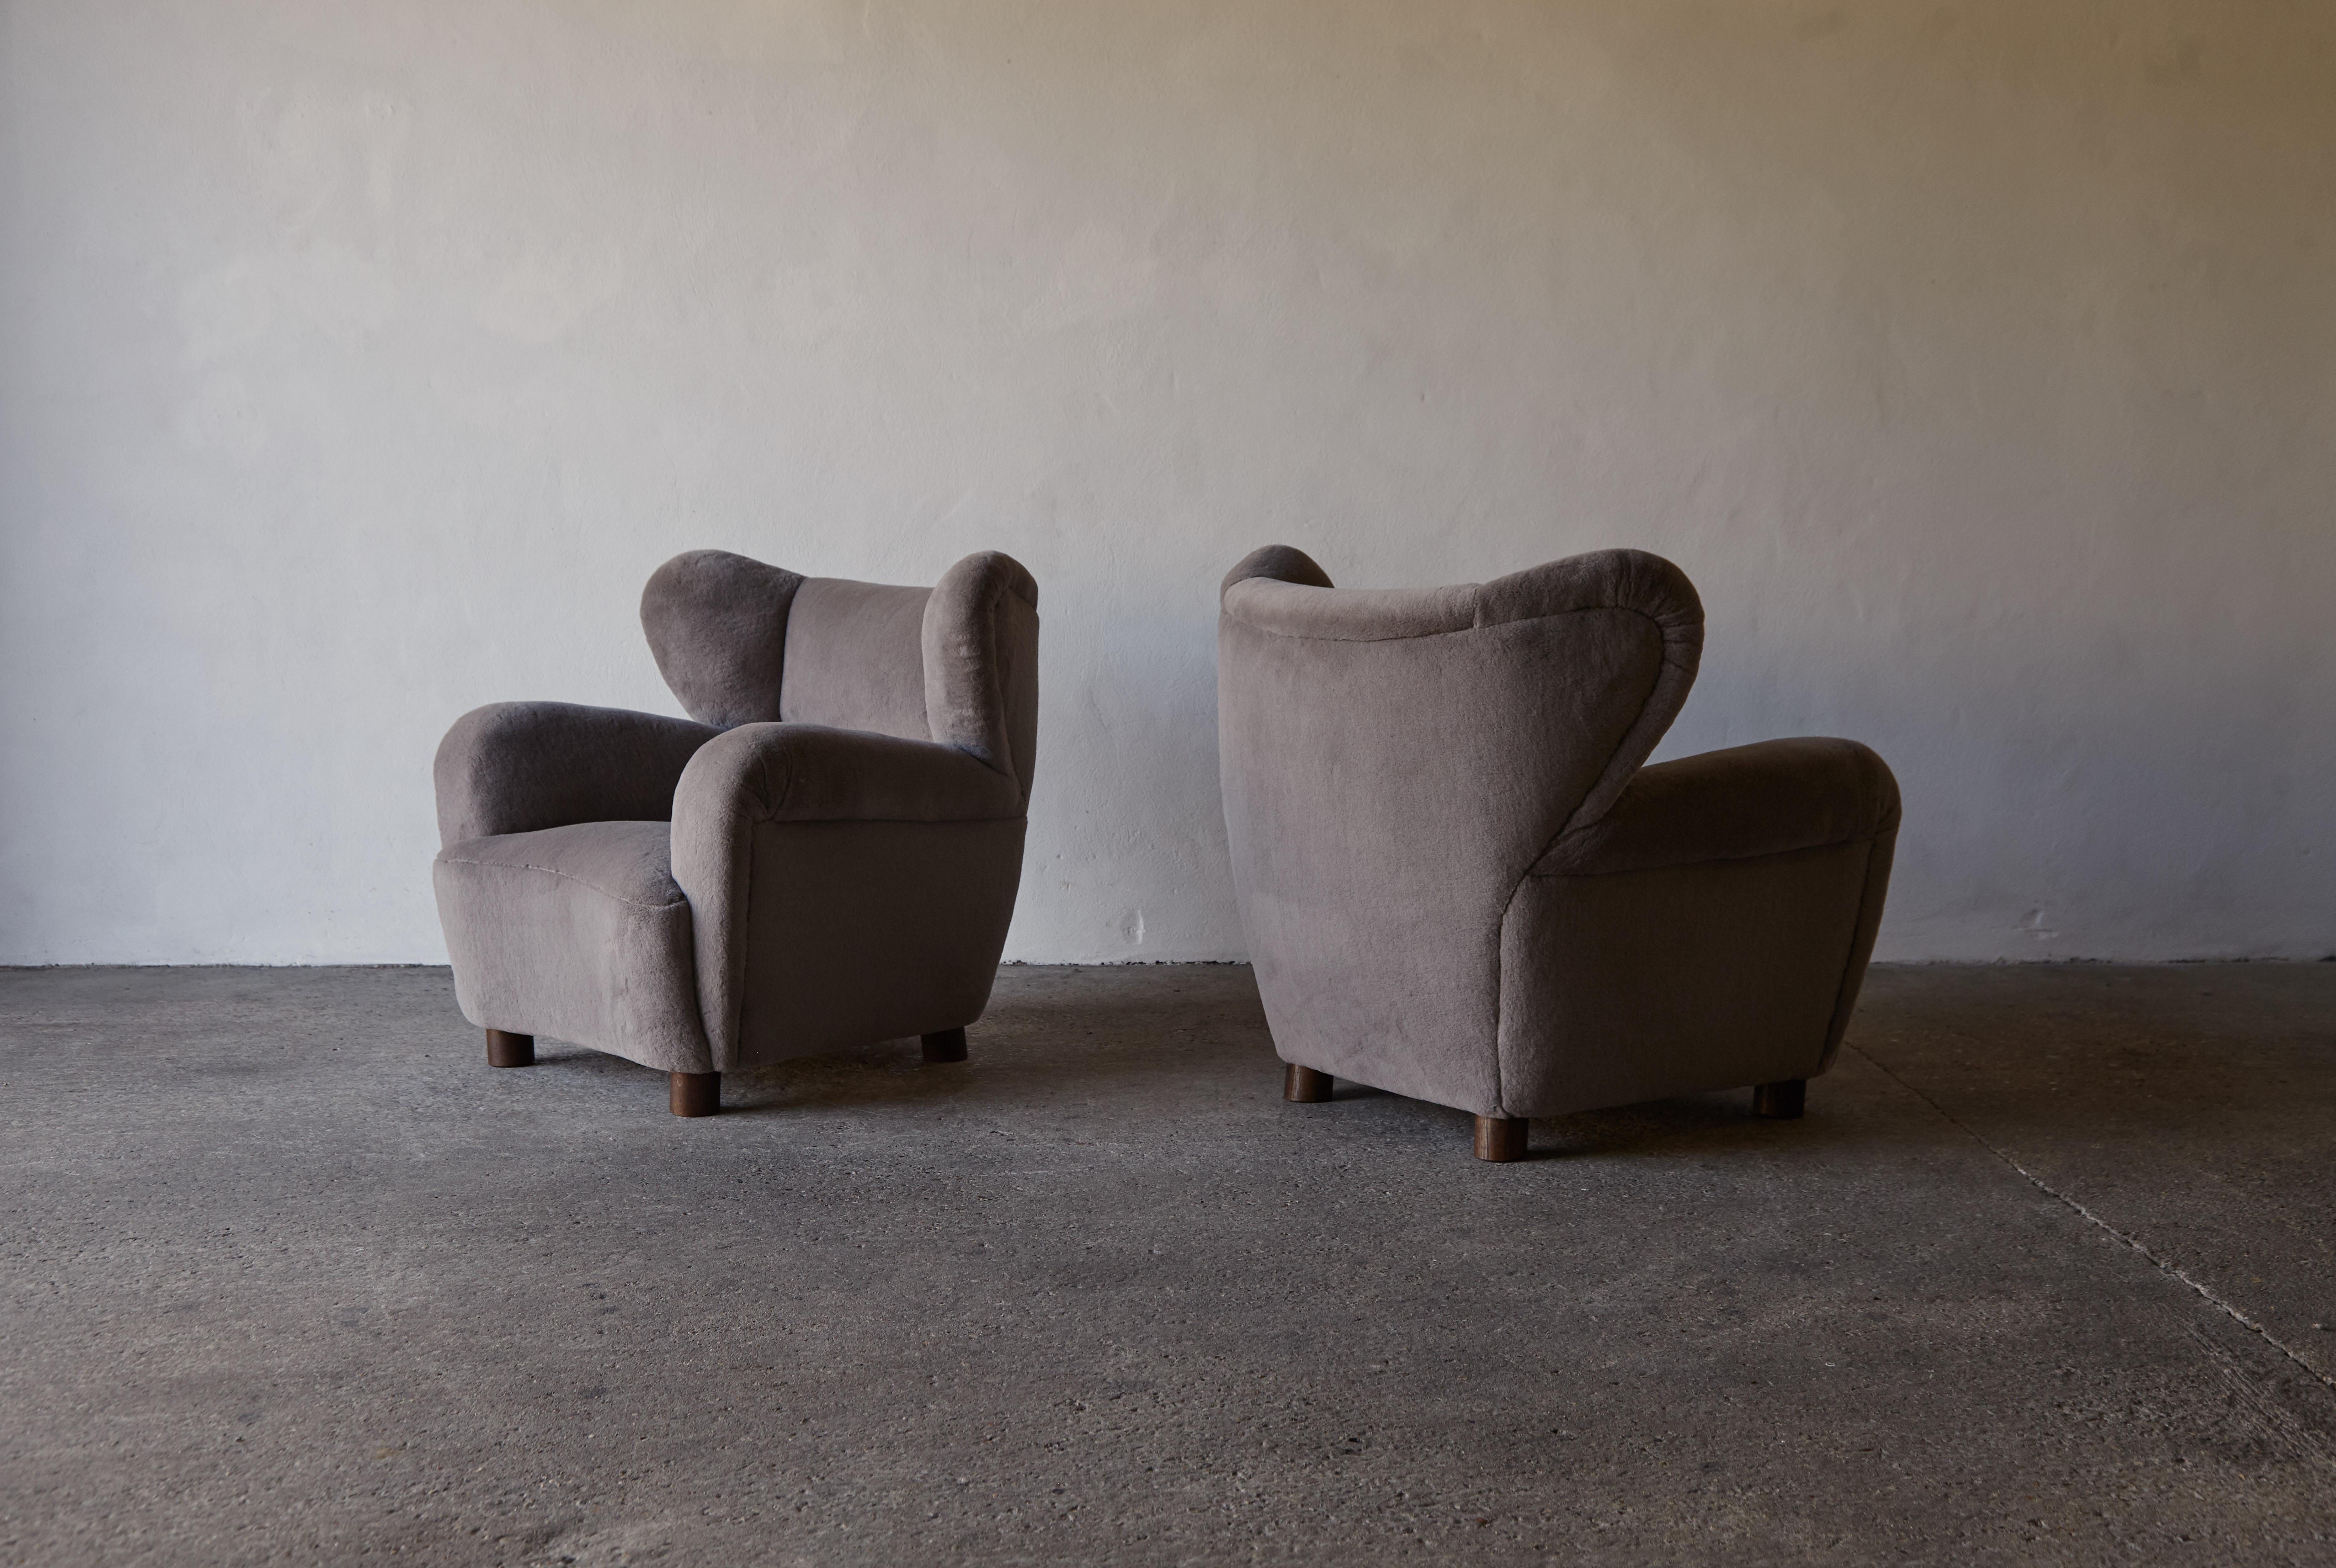 Superb Pair of Armchairs, Newly Upholstered in Pure Alpaca, Denmark, 1940s / 50s 12